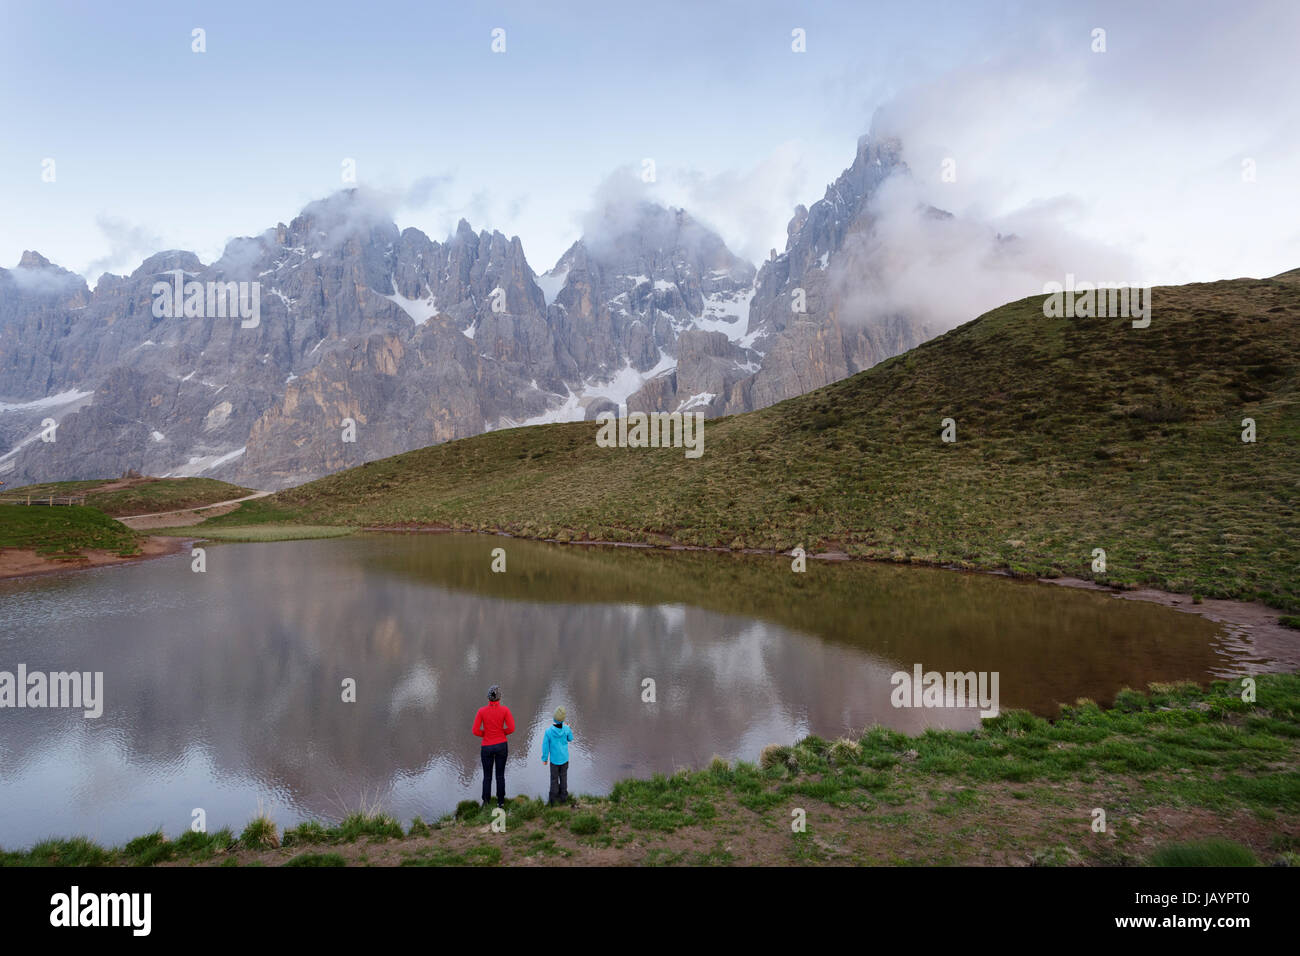 Mother and son standing by the lake at Baita Segantini, Dolomites, Italy. Stock Photo